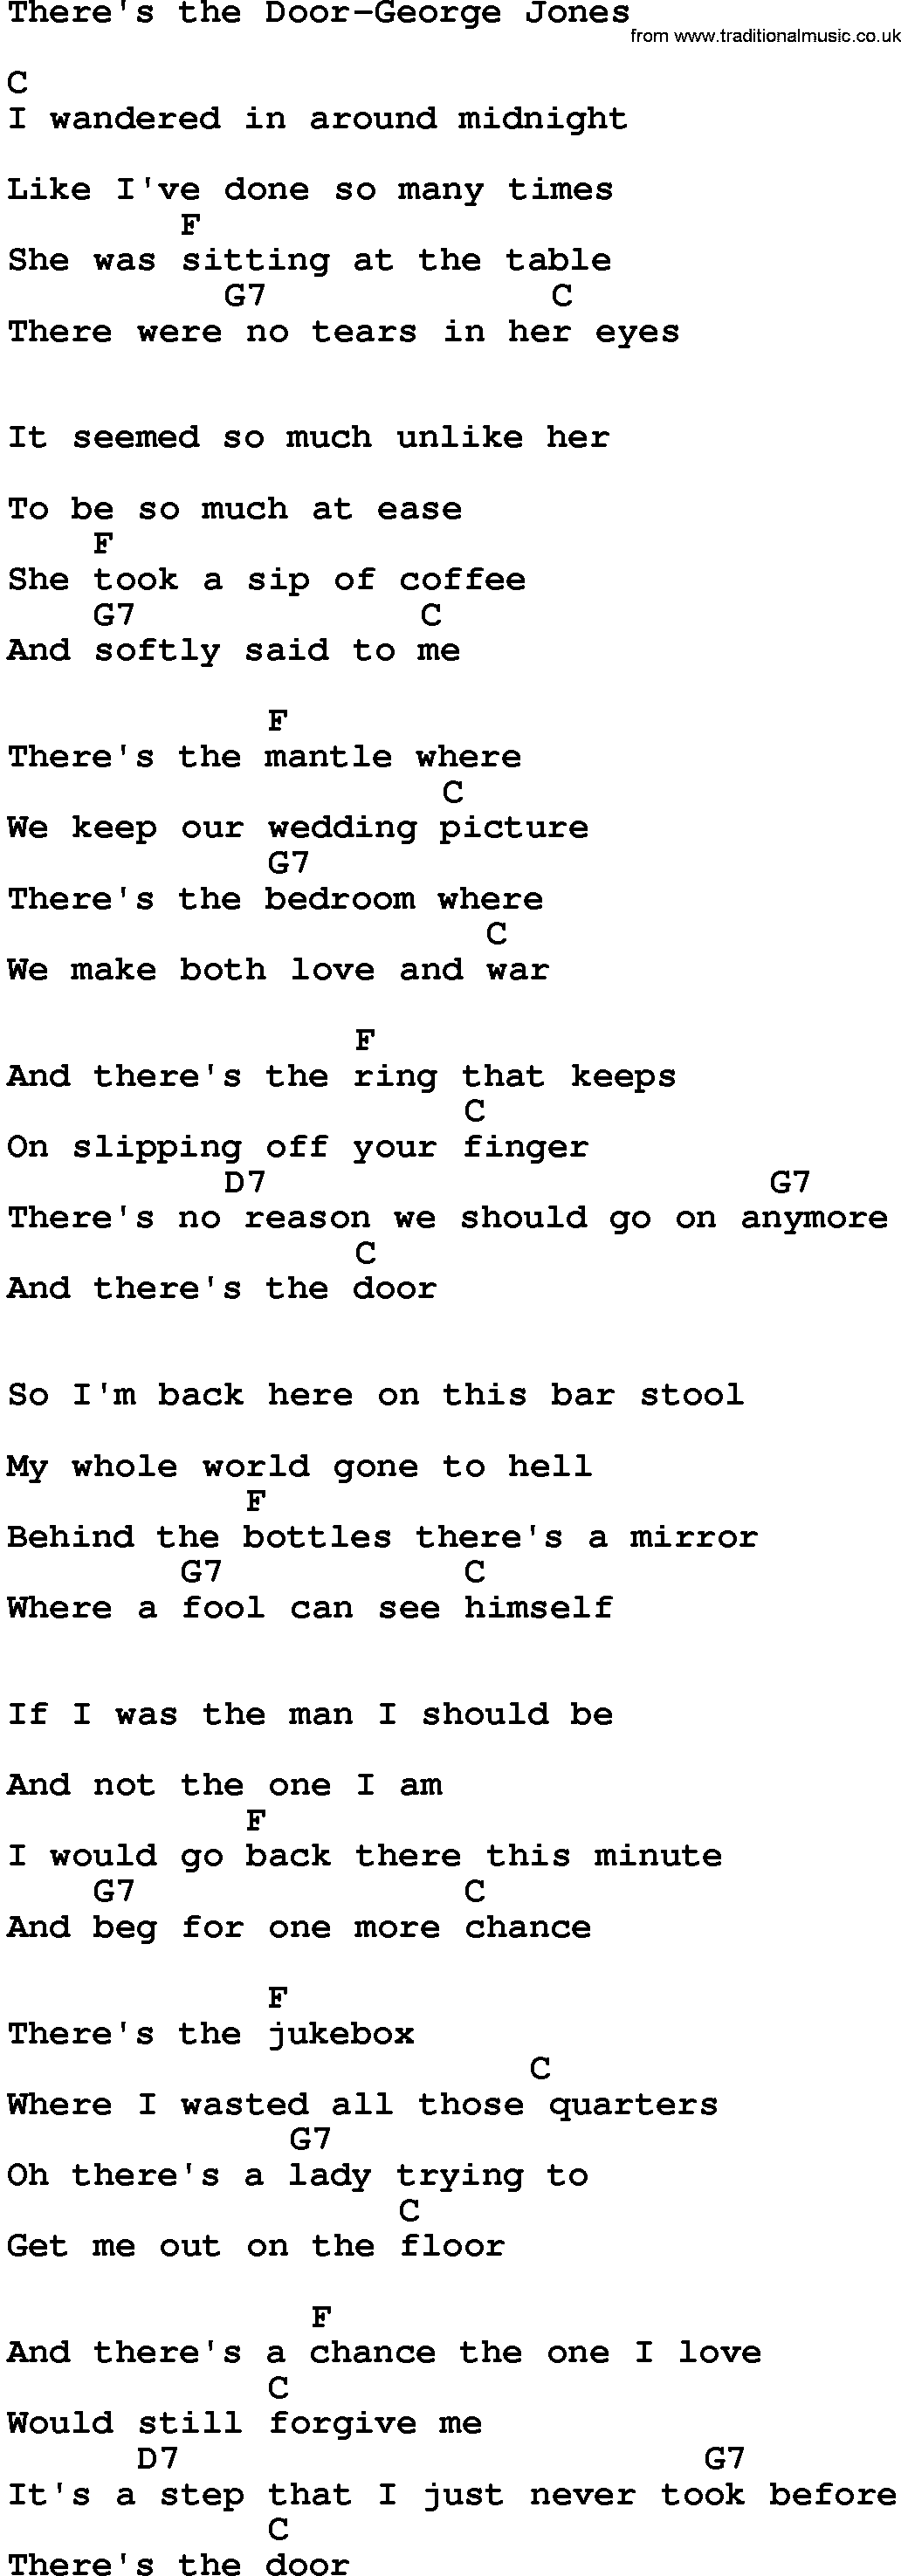 Country music song: There's The Door-George Jones lyrics and chords